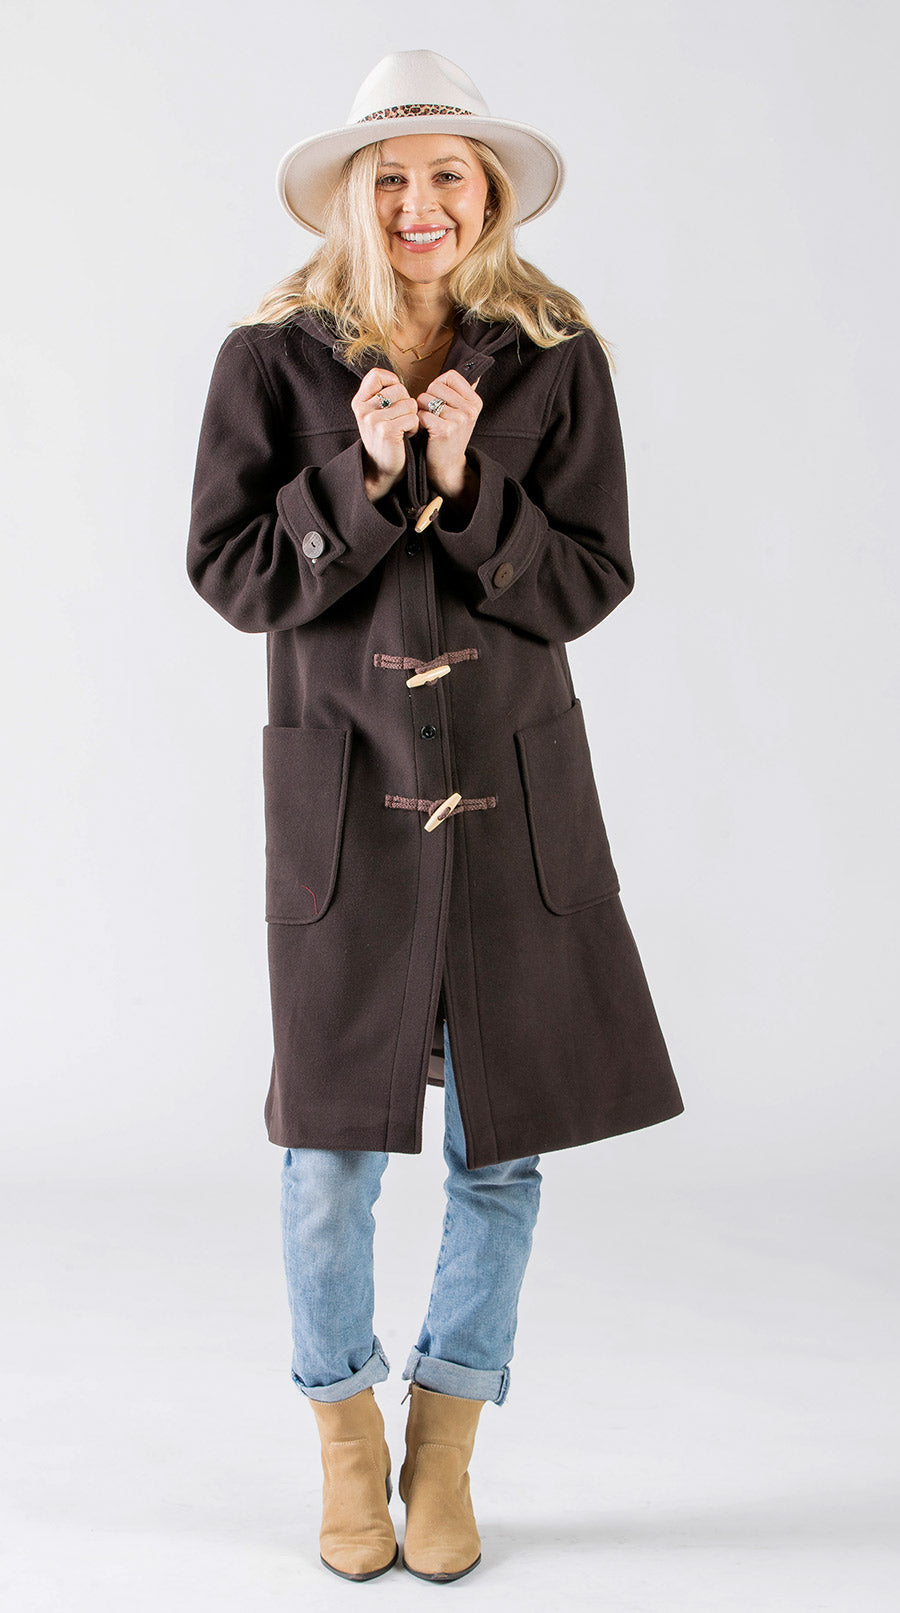 Our model wearing brown coat